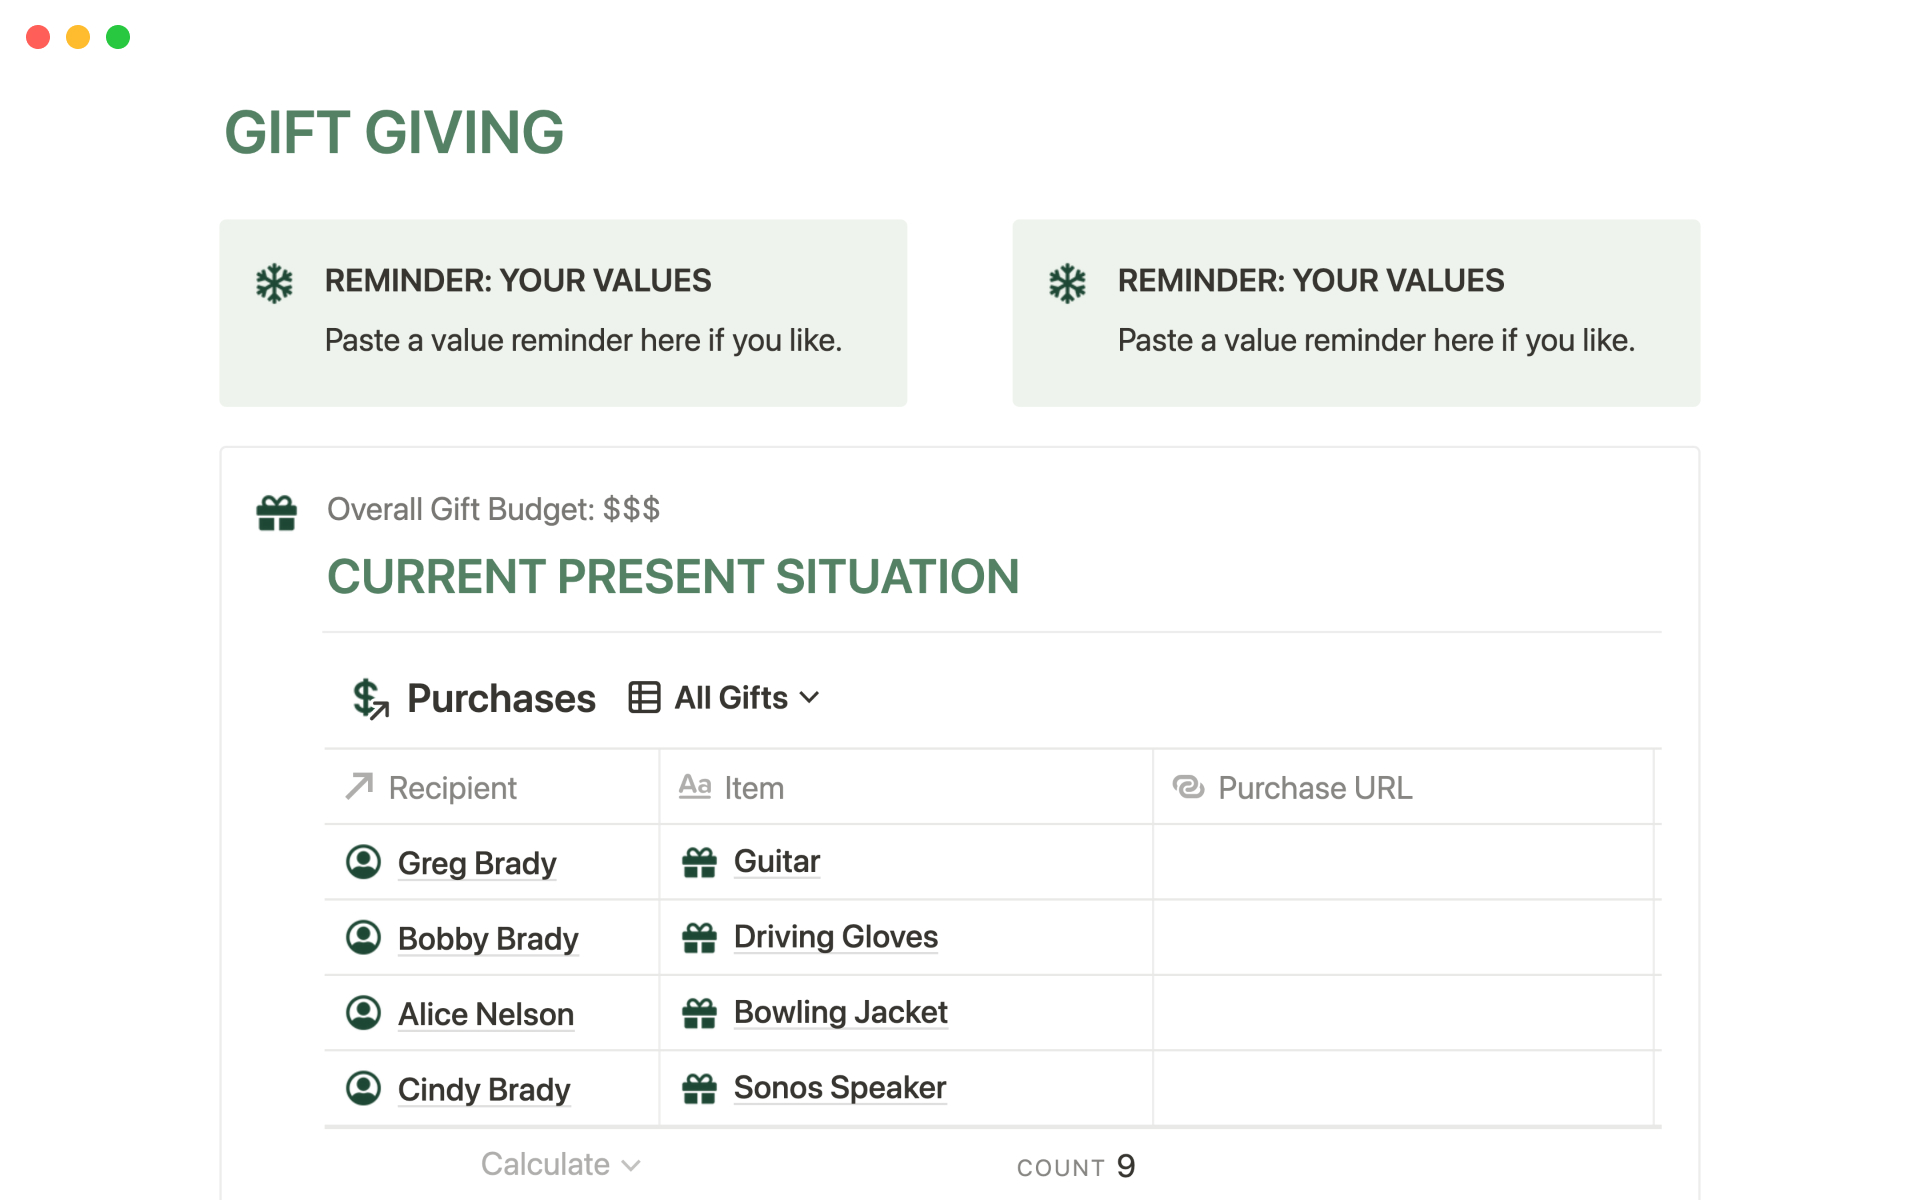 Track tasks, charitable donations, gifts, and the people you're buying gifts for this holiday season.